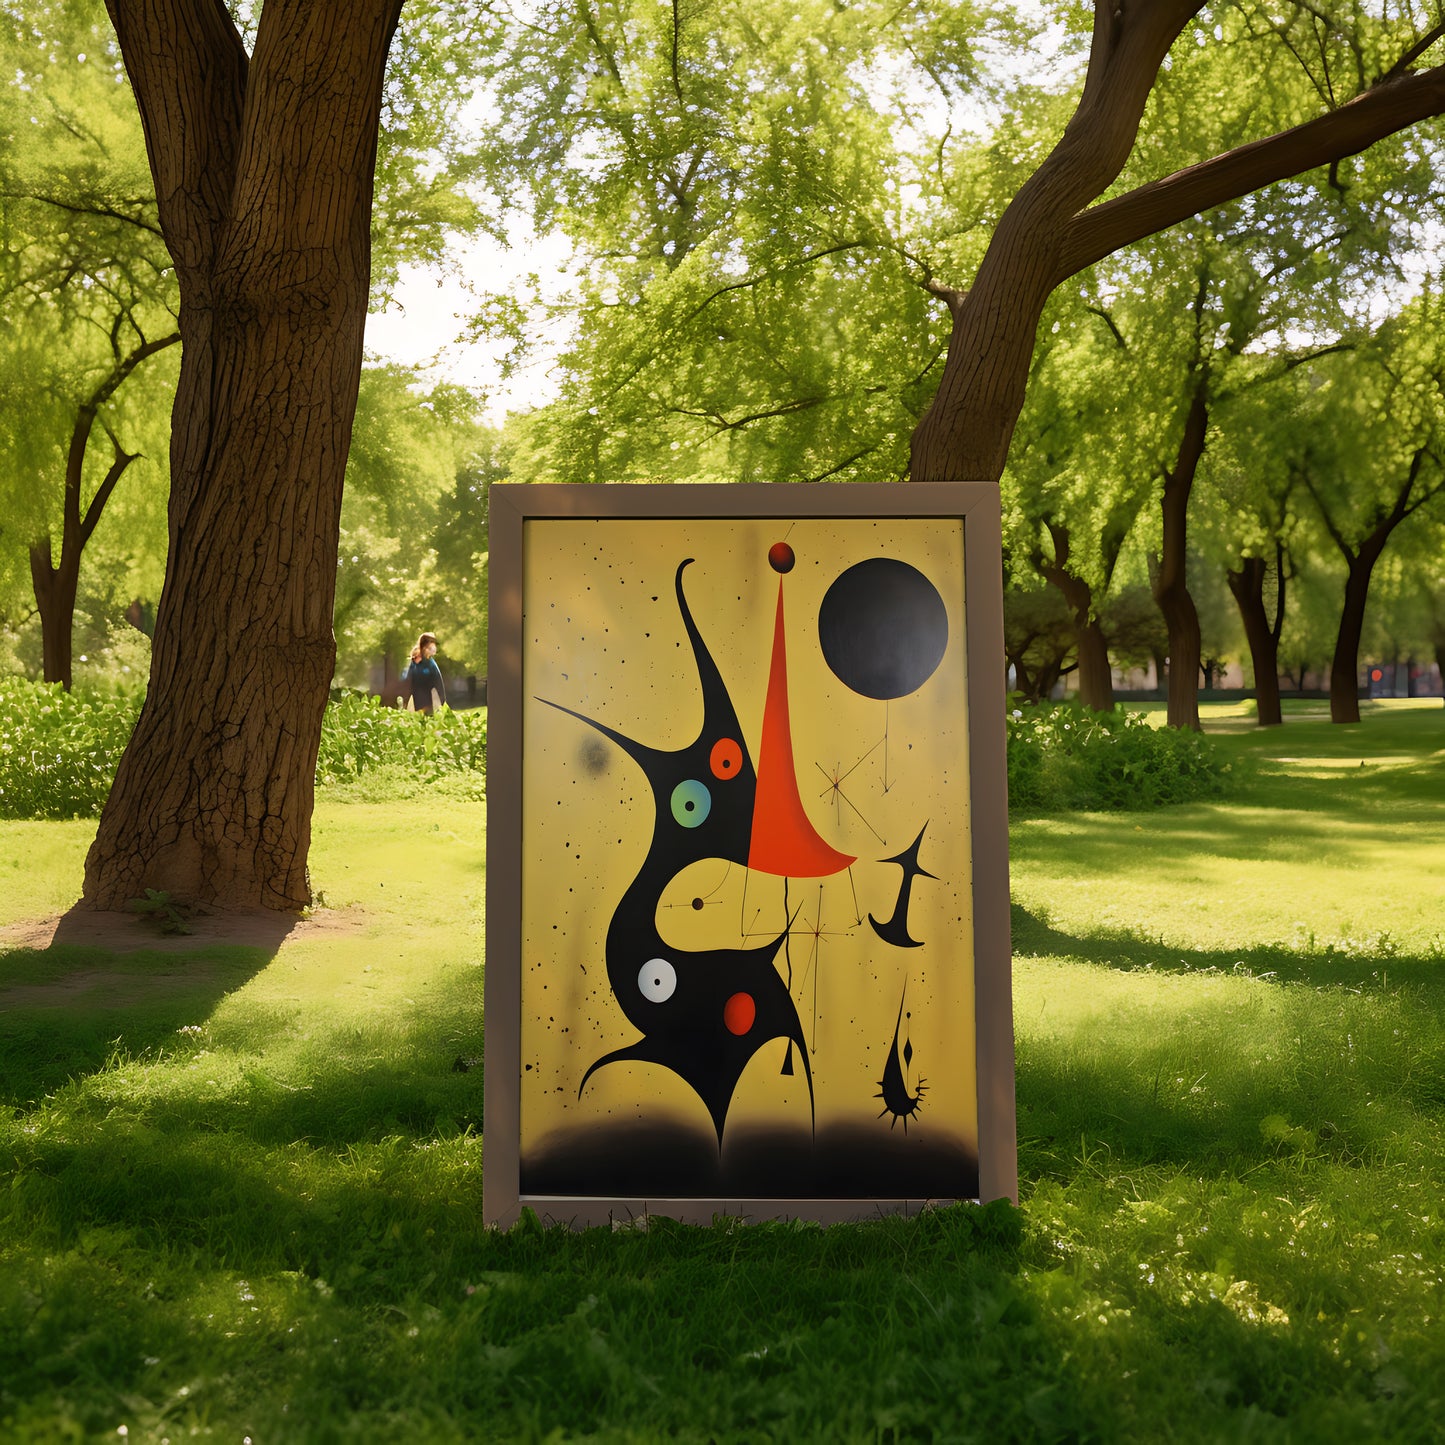 Abstract art on an easel in a park setting.